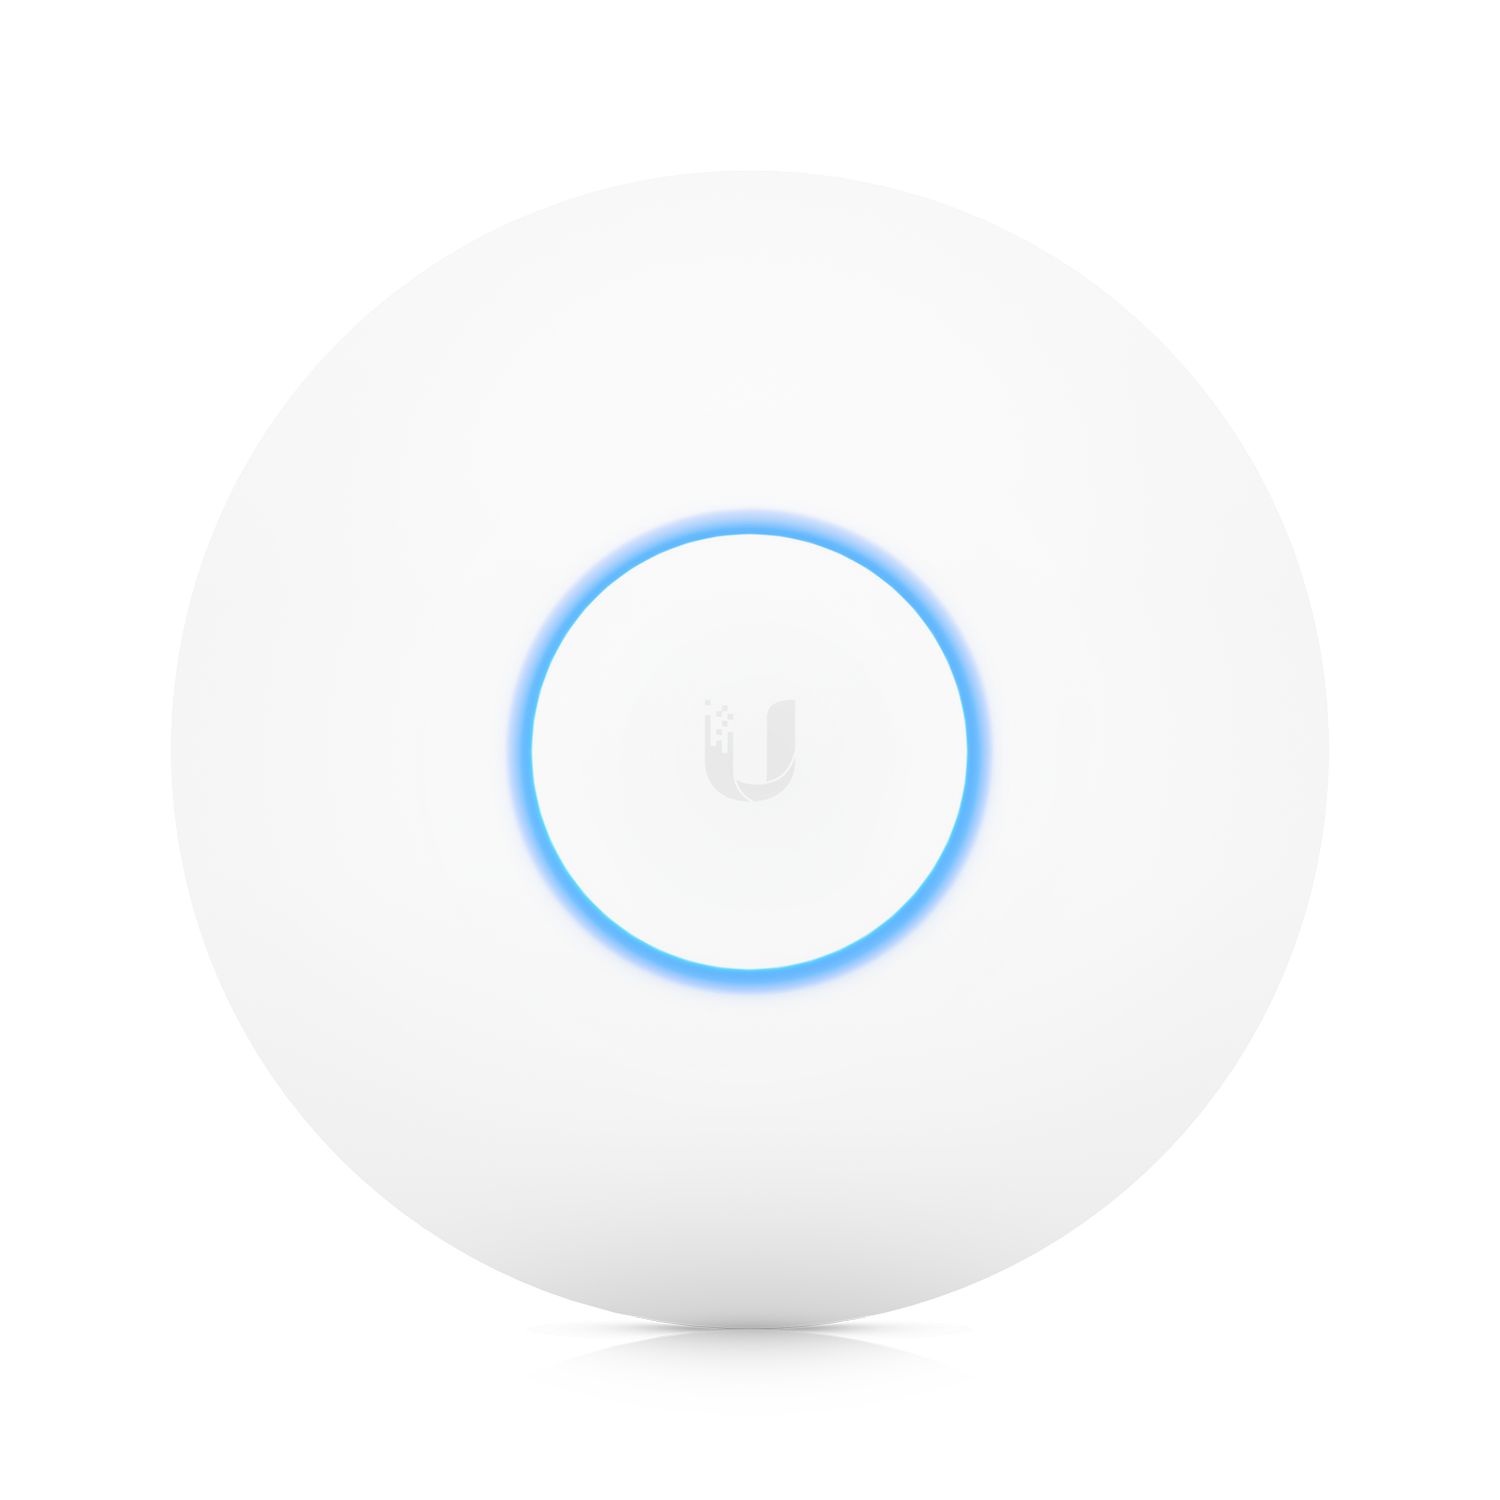 Ubiquiti Access Point UniFi AC PRO,450 Mbps(2.4GHz),1300 Mbps(5GHz), Passive PoE, 48V 0.5A PoE Adapter included, 802.3af/at,2x10/100/1000 RJ45 Port, Integrated 3 dBi 3x3 MIMO (2.4GHz and 5GHz),250+ Concurrent clients_1